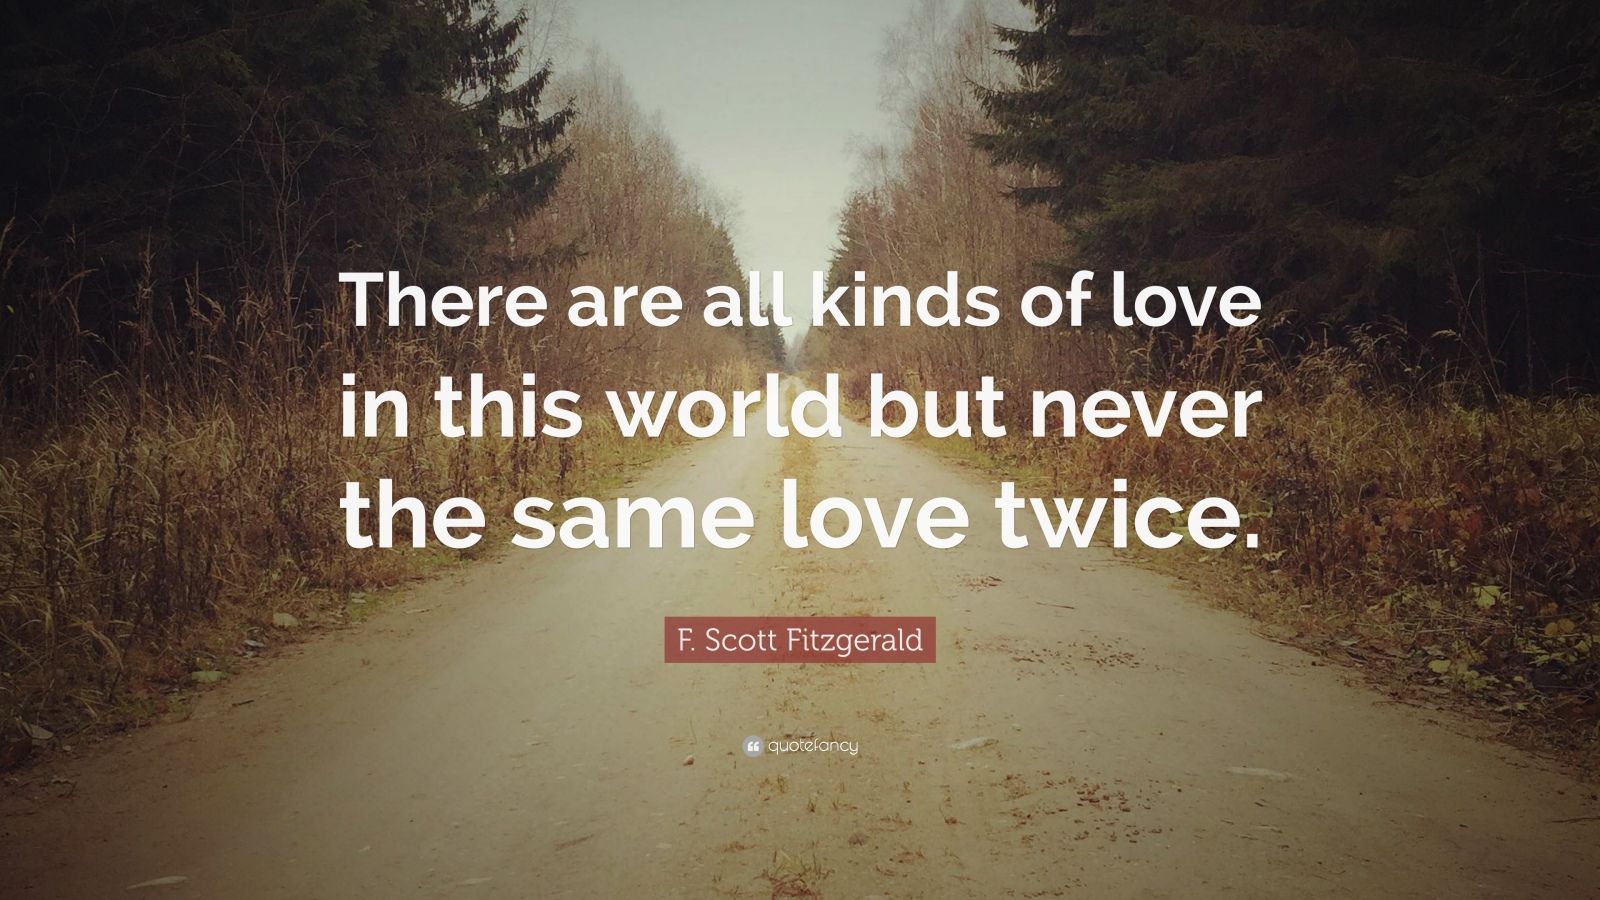 F. Scott Fitzgerald Quote: “There are all kinds of love in this world ...